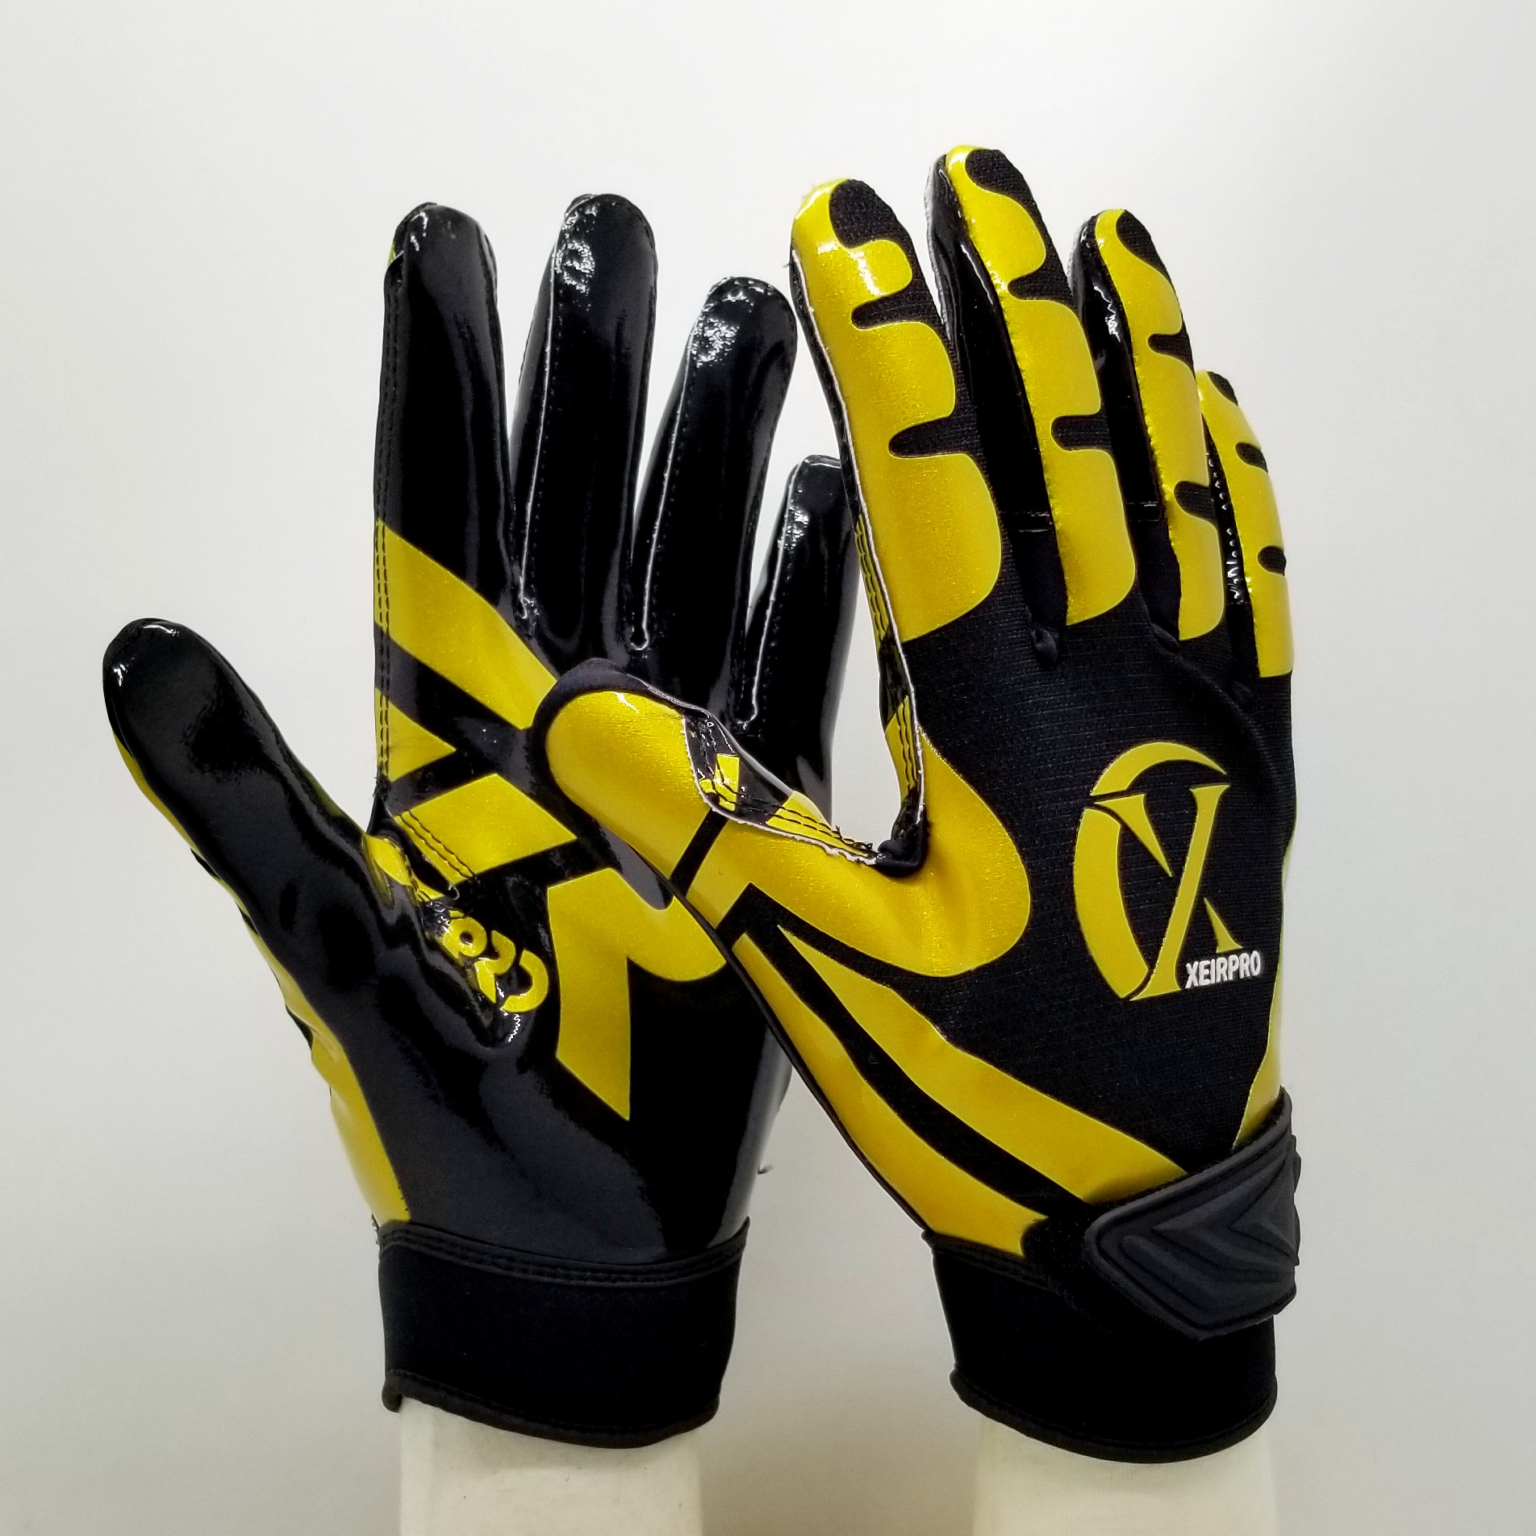 XEIR Pro Football Gloves | Ultimate Grip Receiver Gloves | Adult Size ...